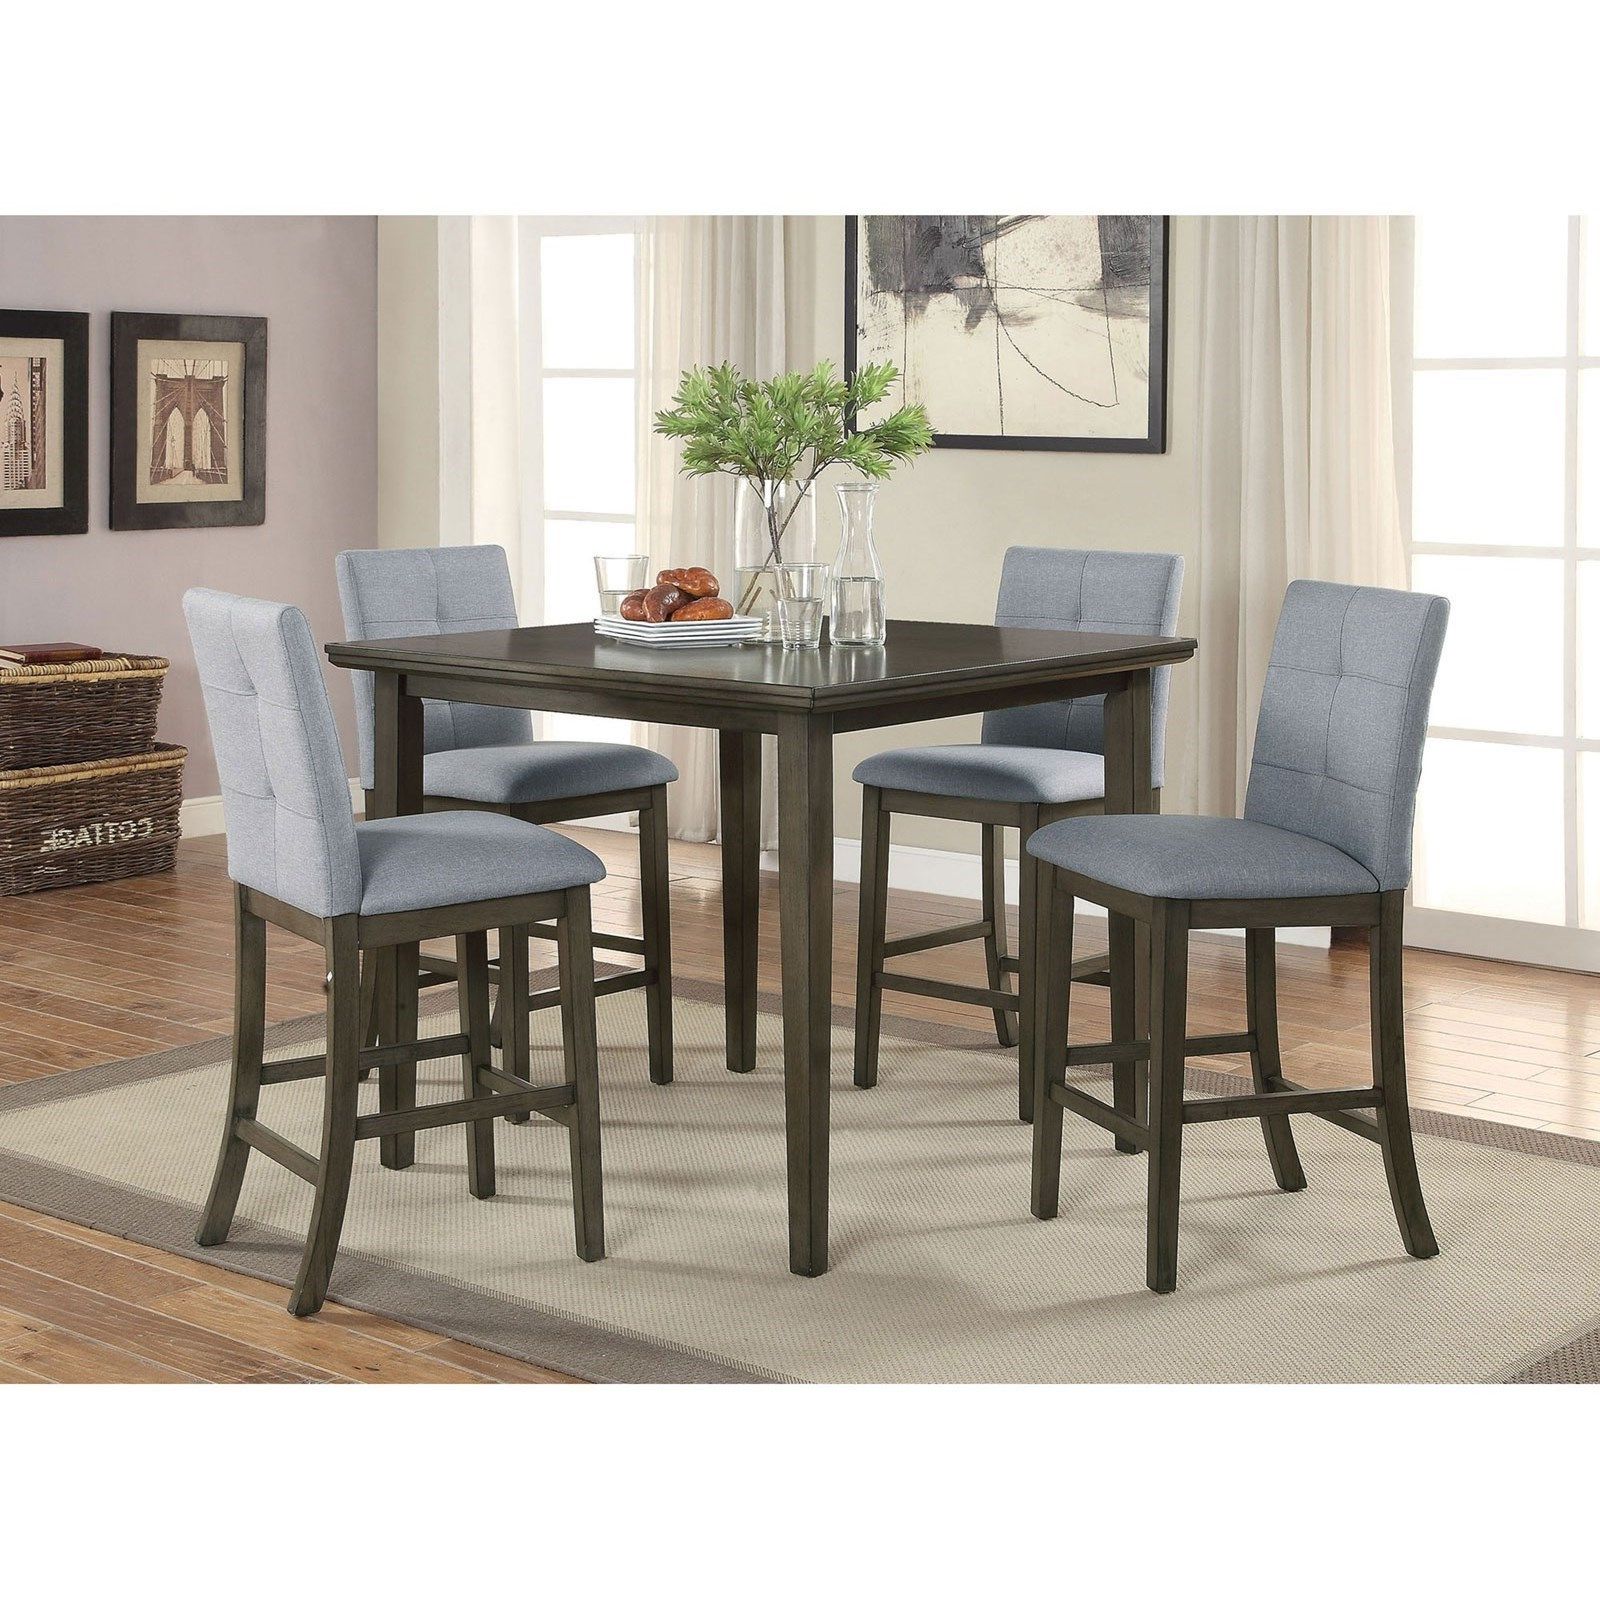 Preferred Furniture Of America Charlene Cm3354gy Pt 5pk 5 Piece Within Counter Height Dining Tables (View 9 of 20)